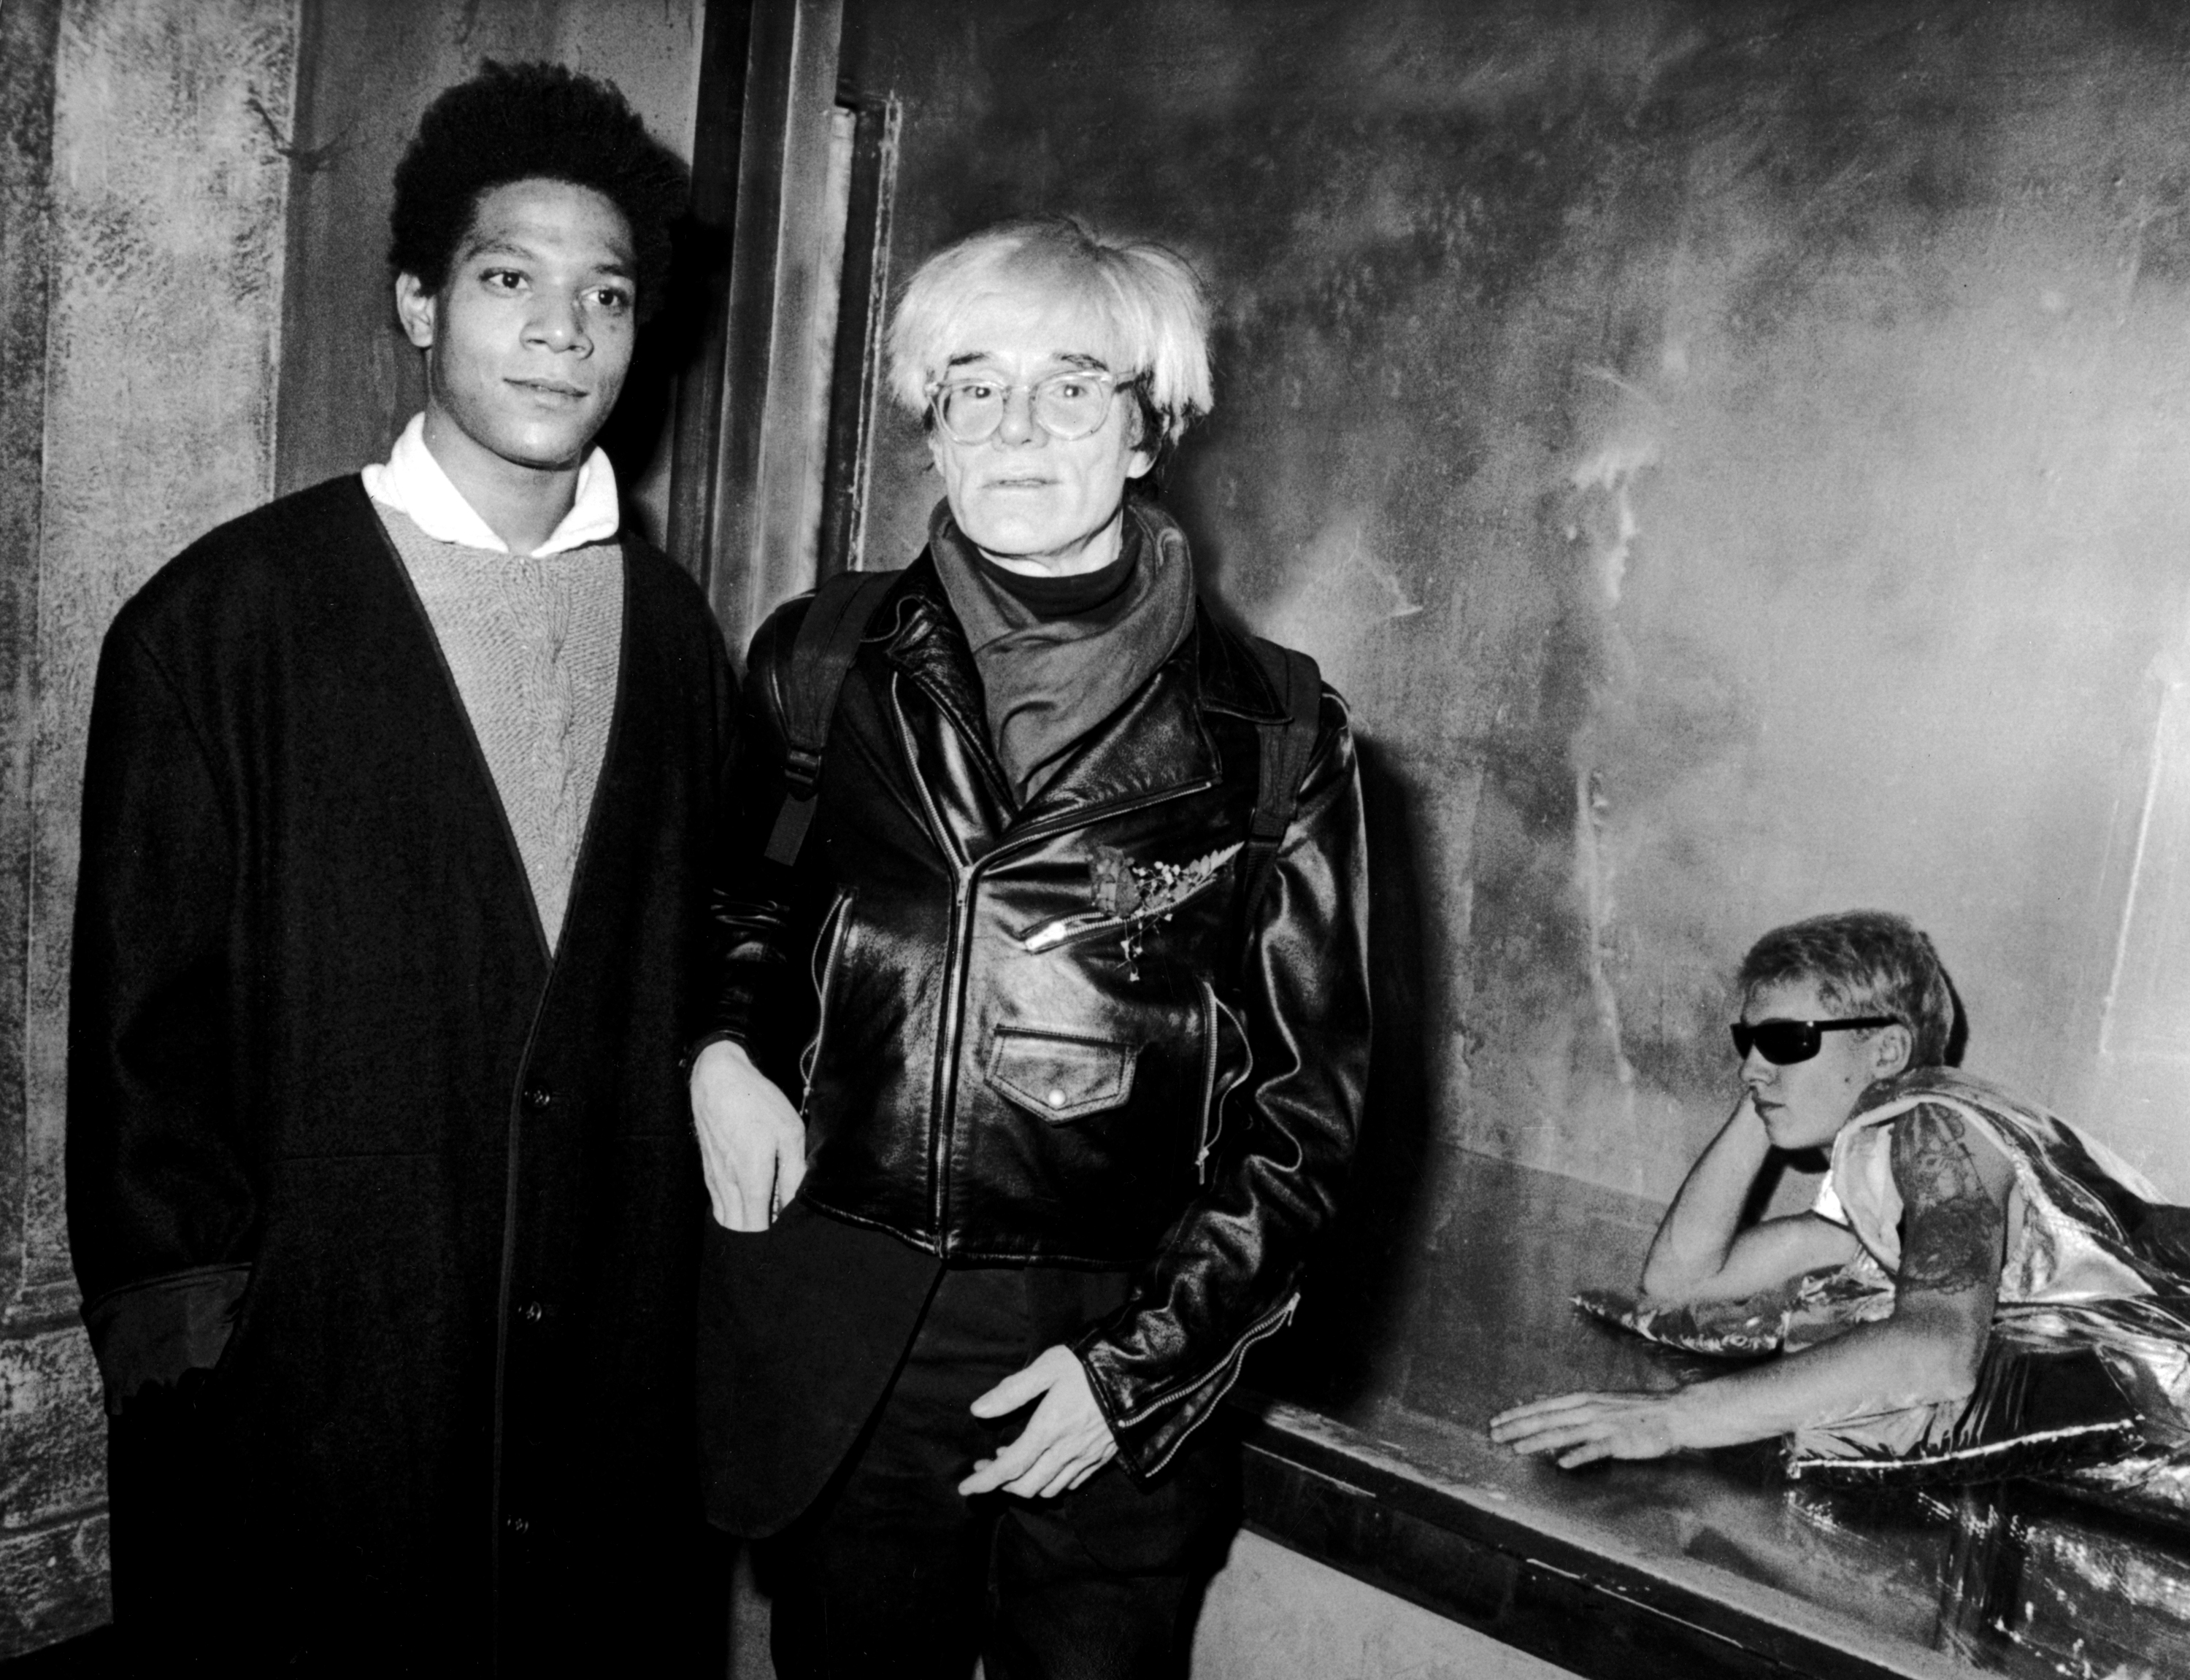 An Intimate Glimpse Inside Andy Warhol’s Friendship with Jean-Michel Basquiat Revealed in Previously Unseen Photos